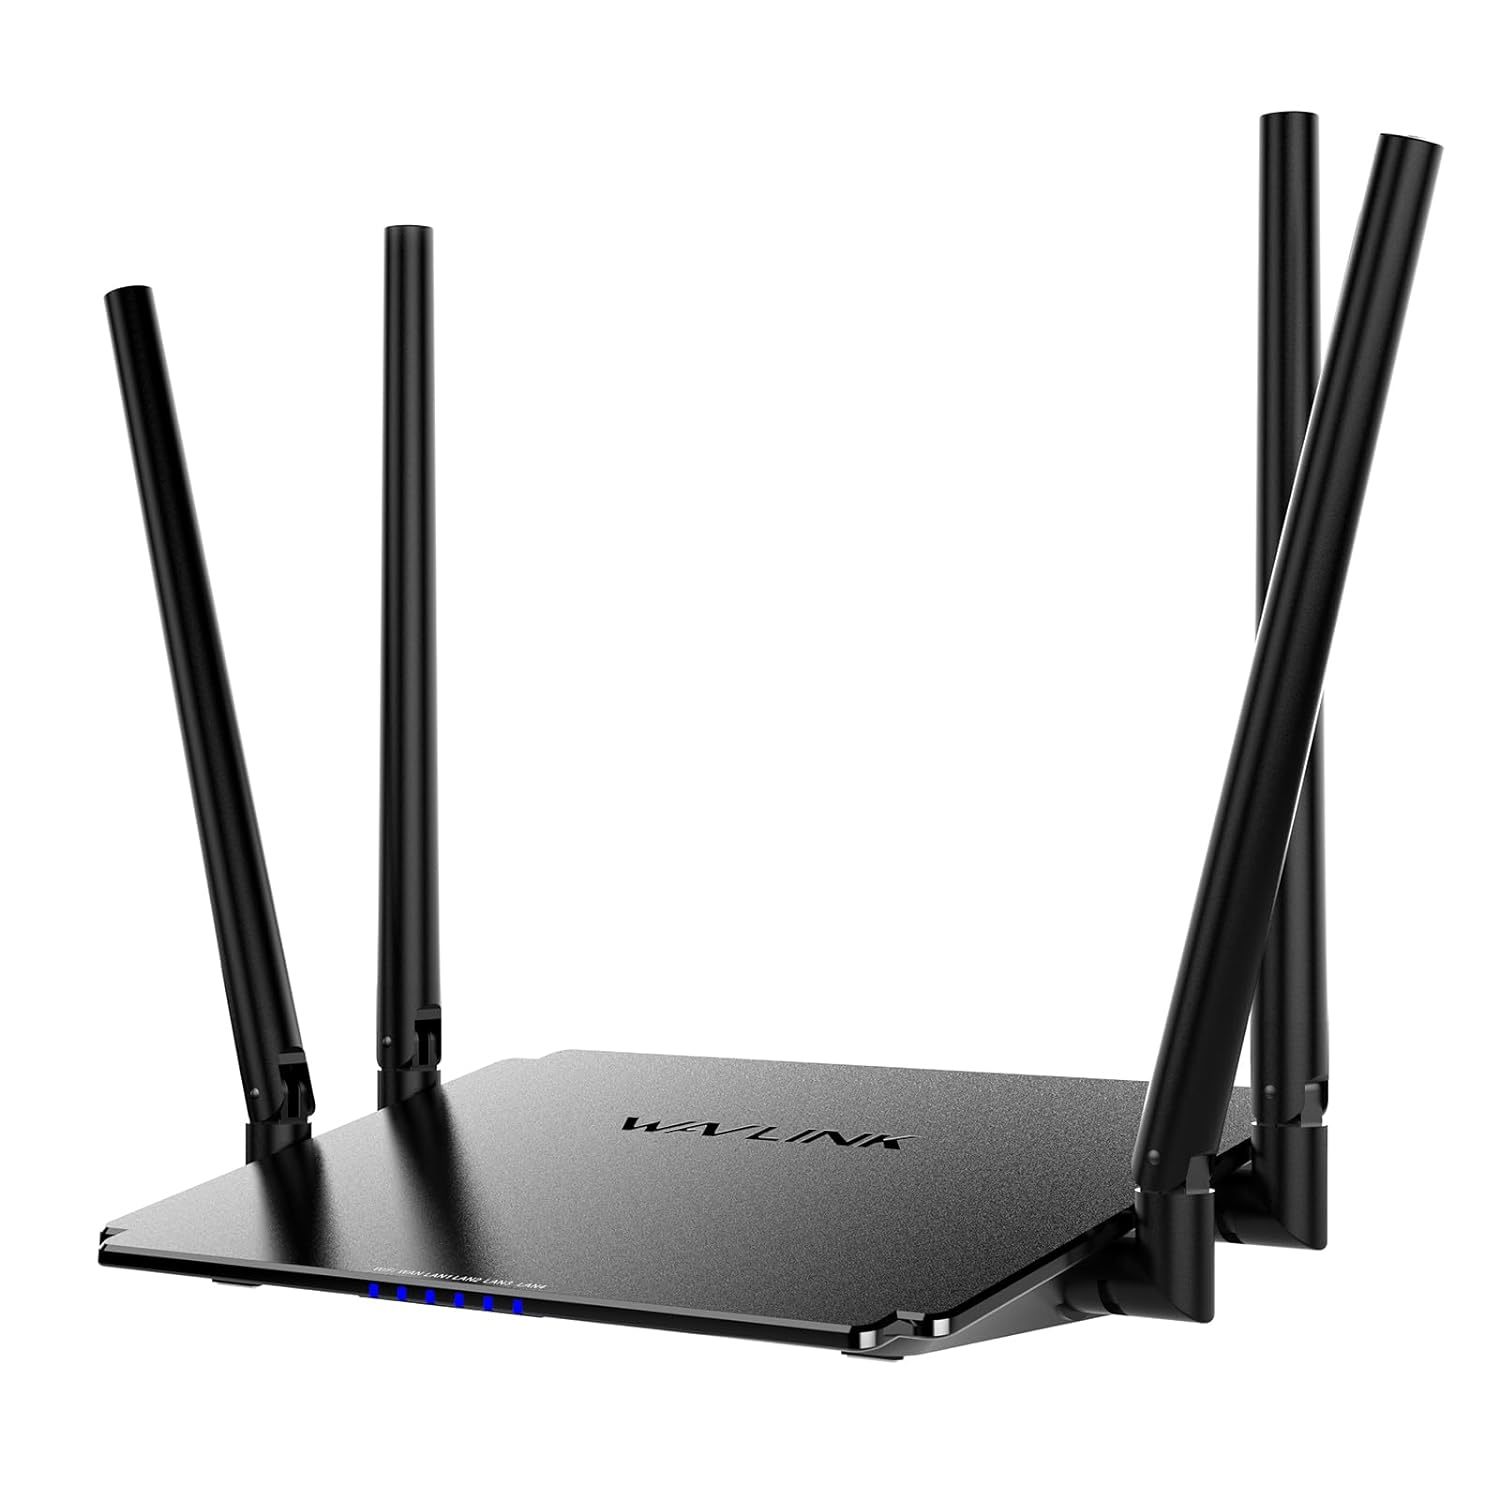 WAVLINK AC1200 Wireless WiFi Router, 5GHz+2.4GHz Dual Band WiFi 5 Router with 4x - $54.99